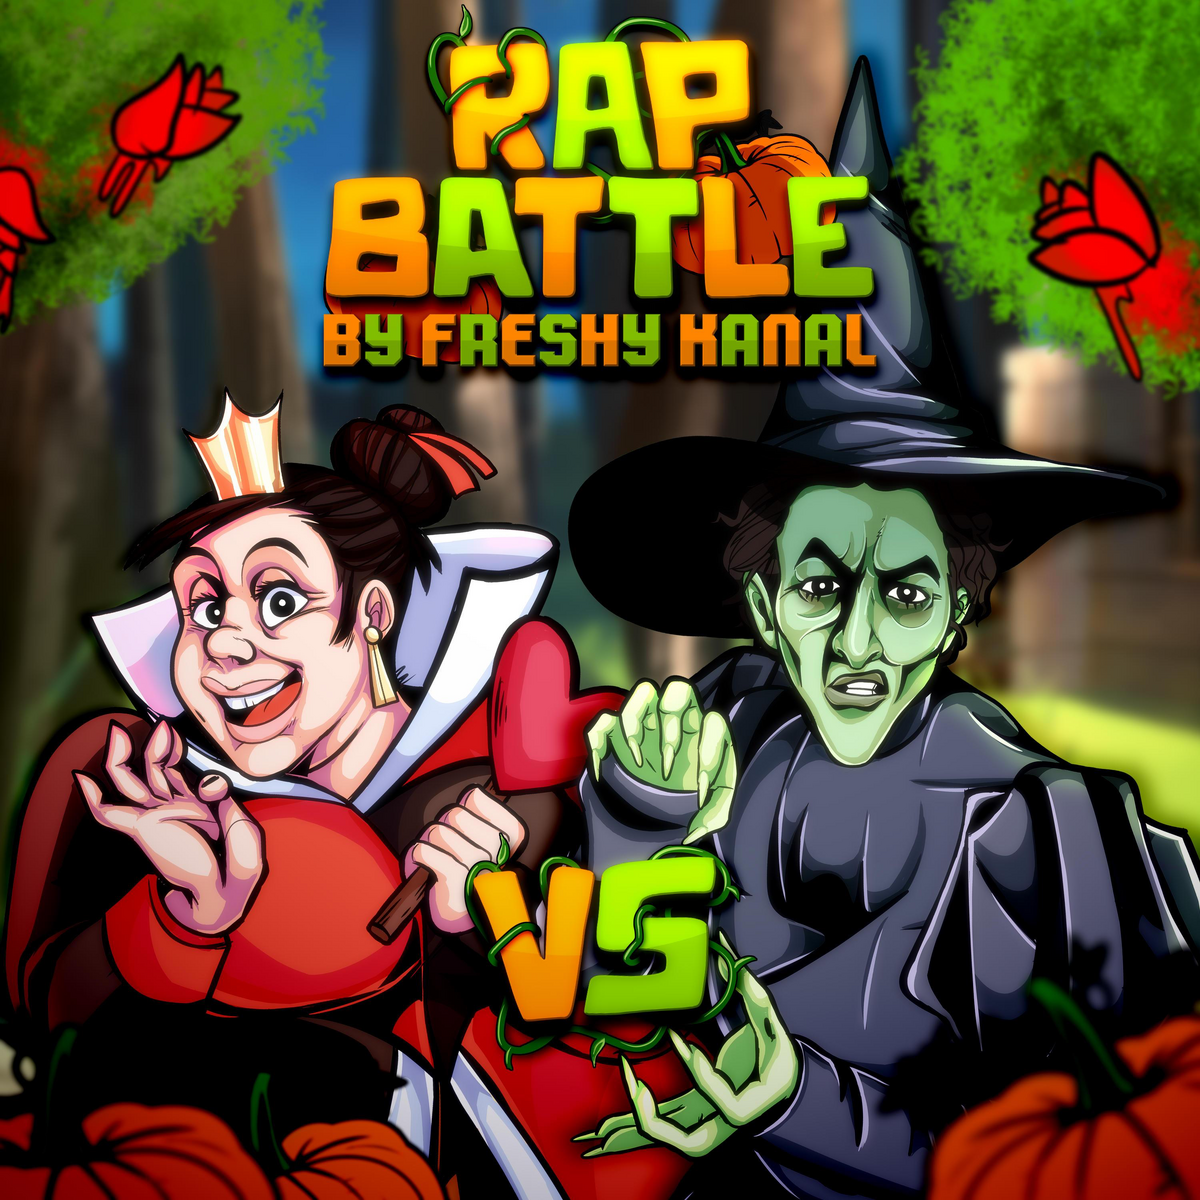 Queen Of Hearts Vs Wicked Witch Of The West Freshy Kanal Cinematic Wiki Fandom 